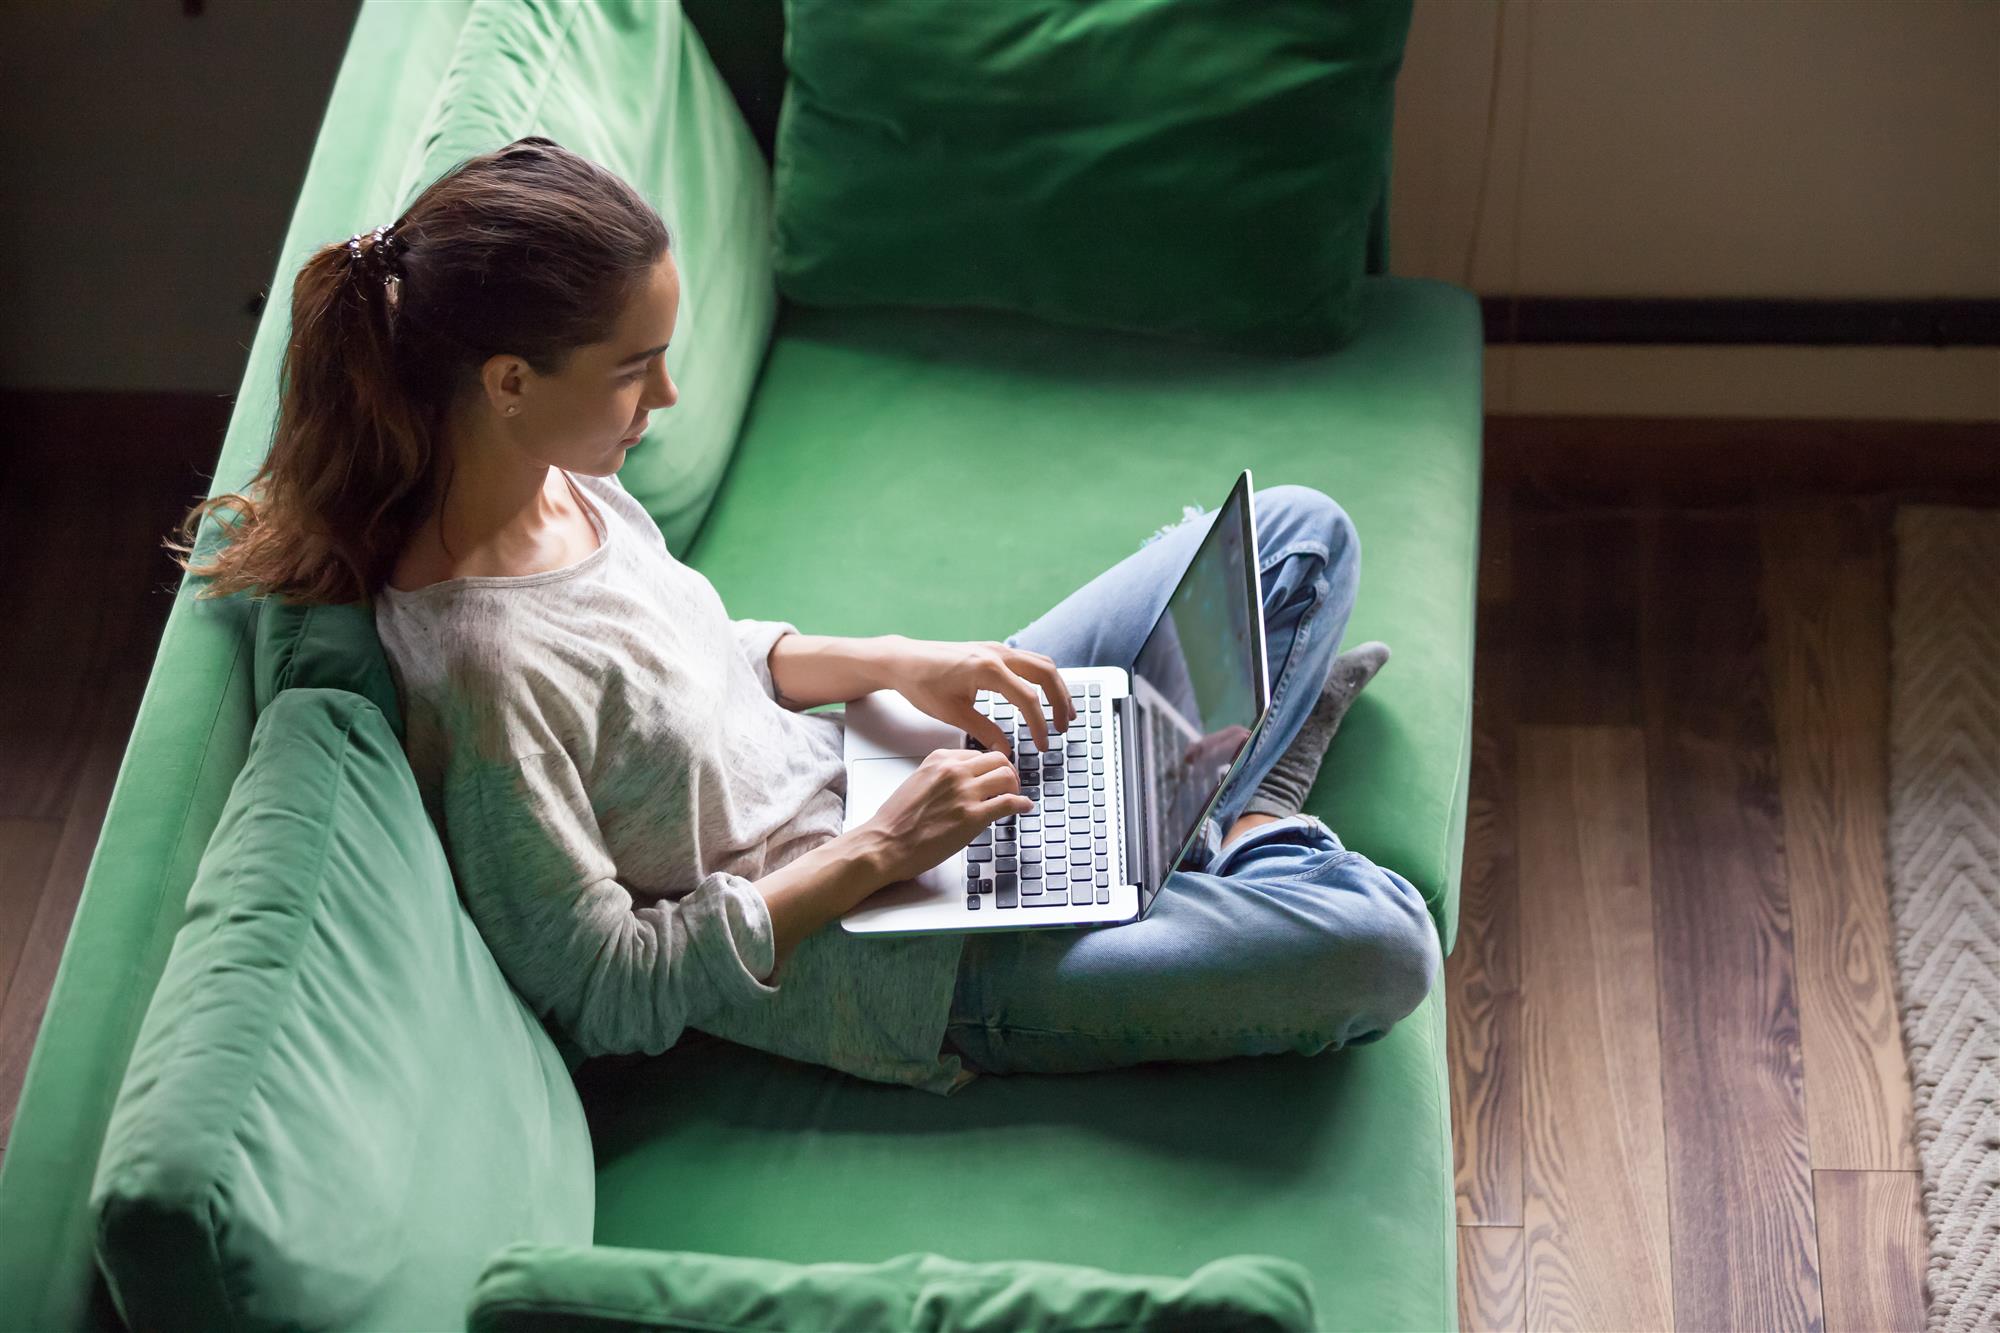 3 Ways to Help Your Family Online As You #StayAtHome